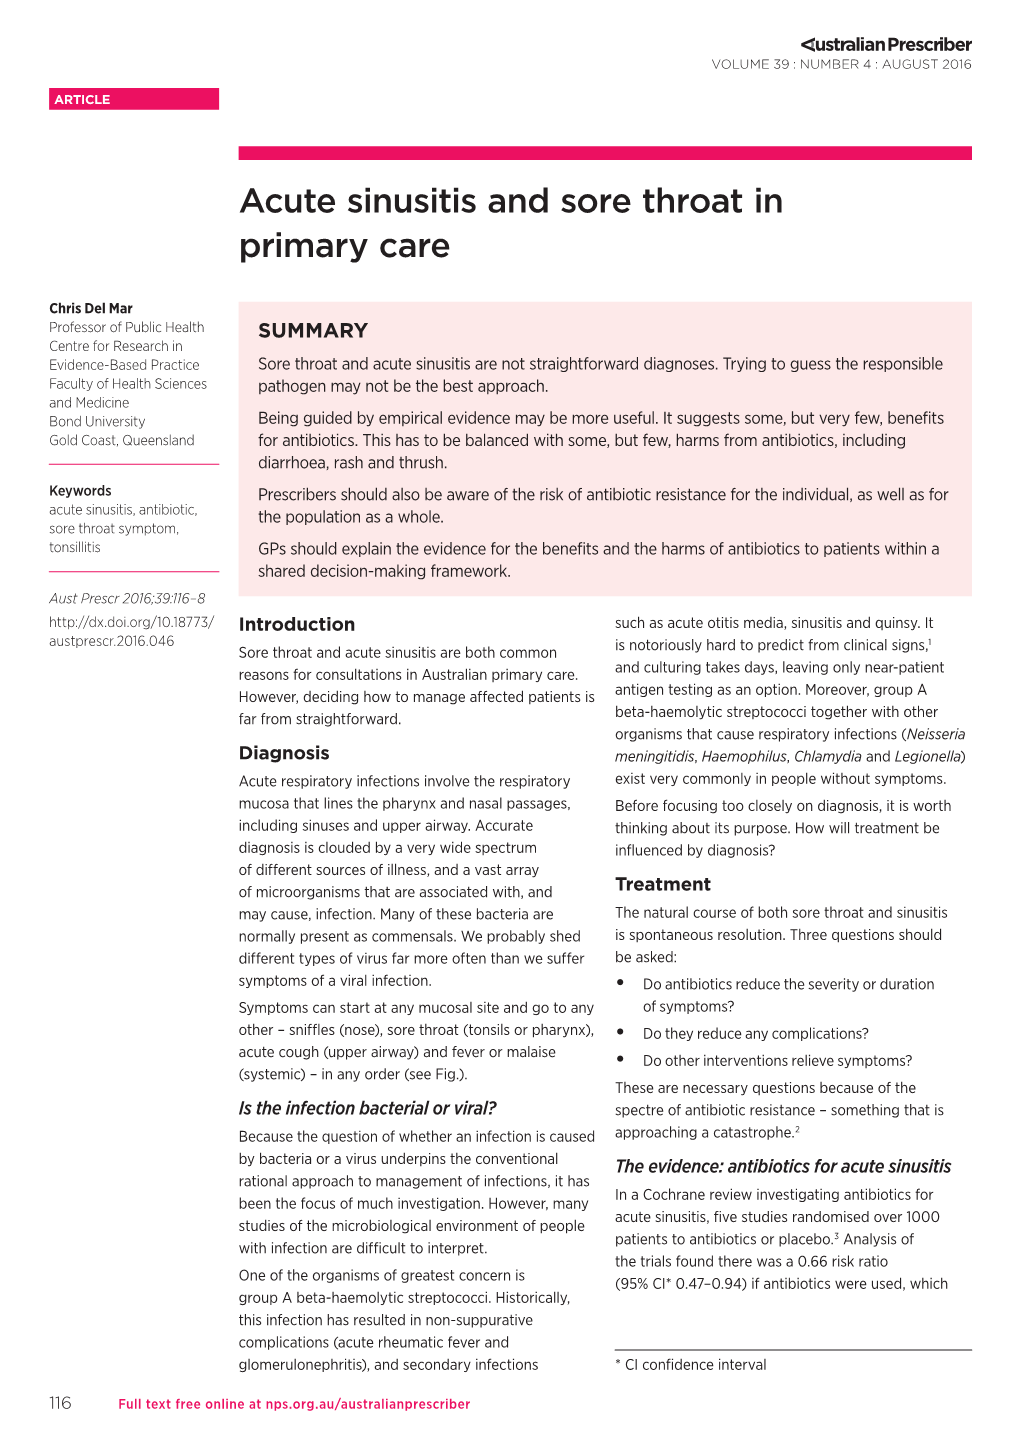 Acute Sinusitis and Sore Throat in Primary Care